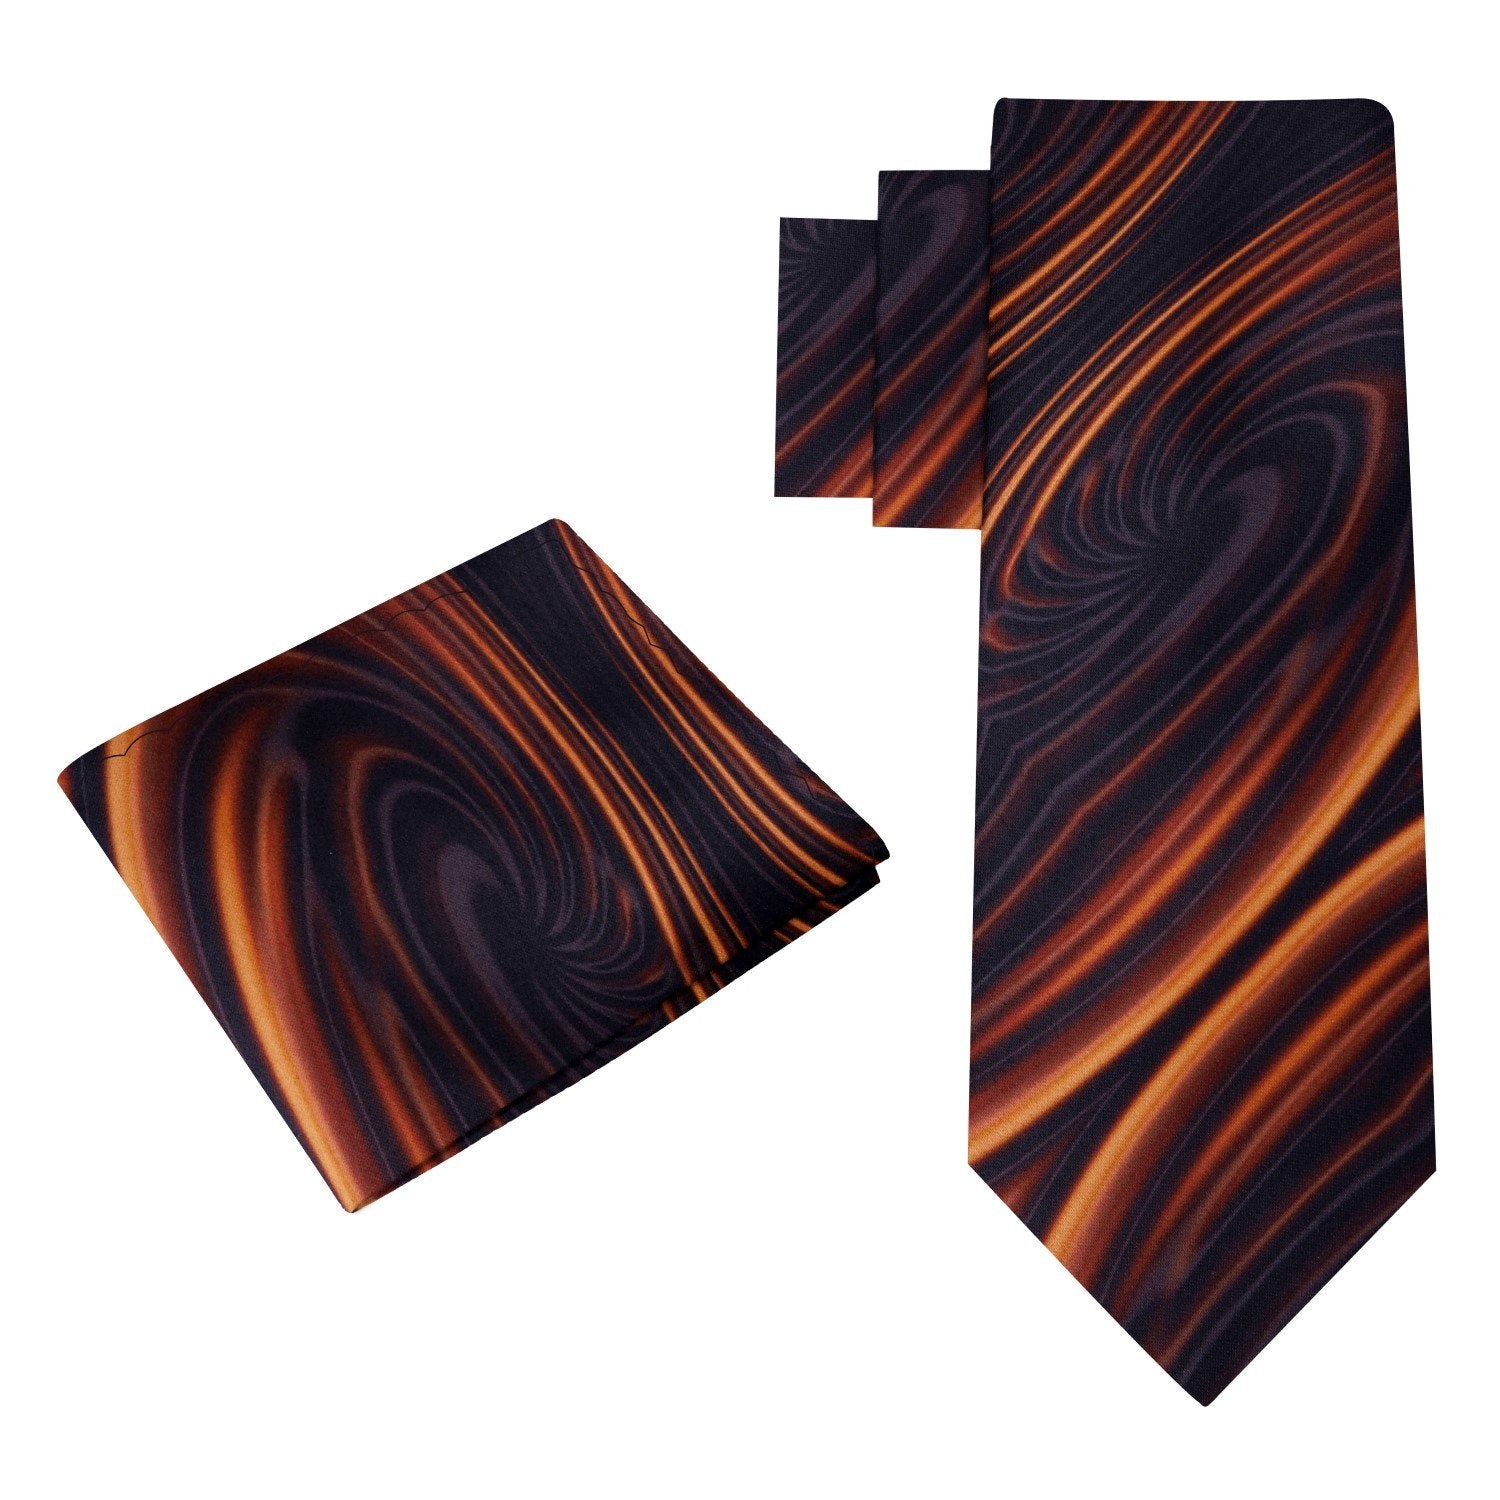 Alt View: Rich Caramel Swirl Tie and Square